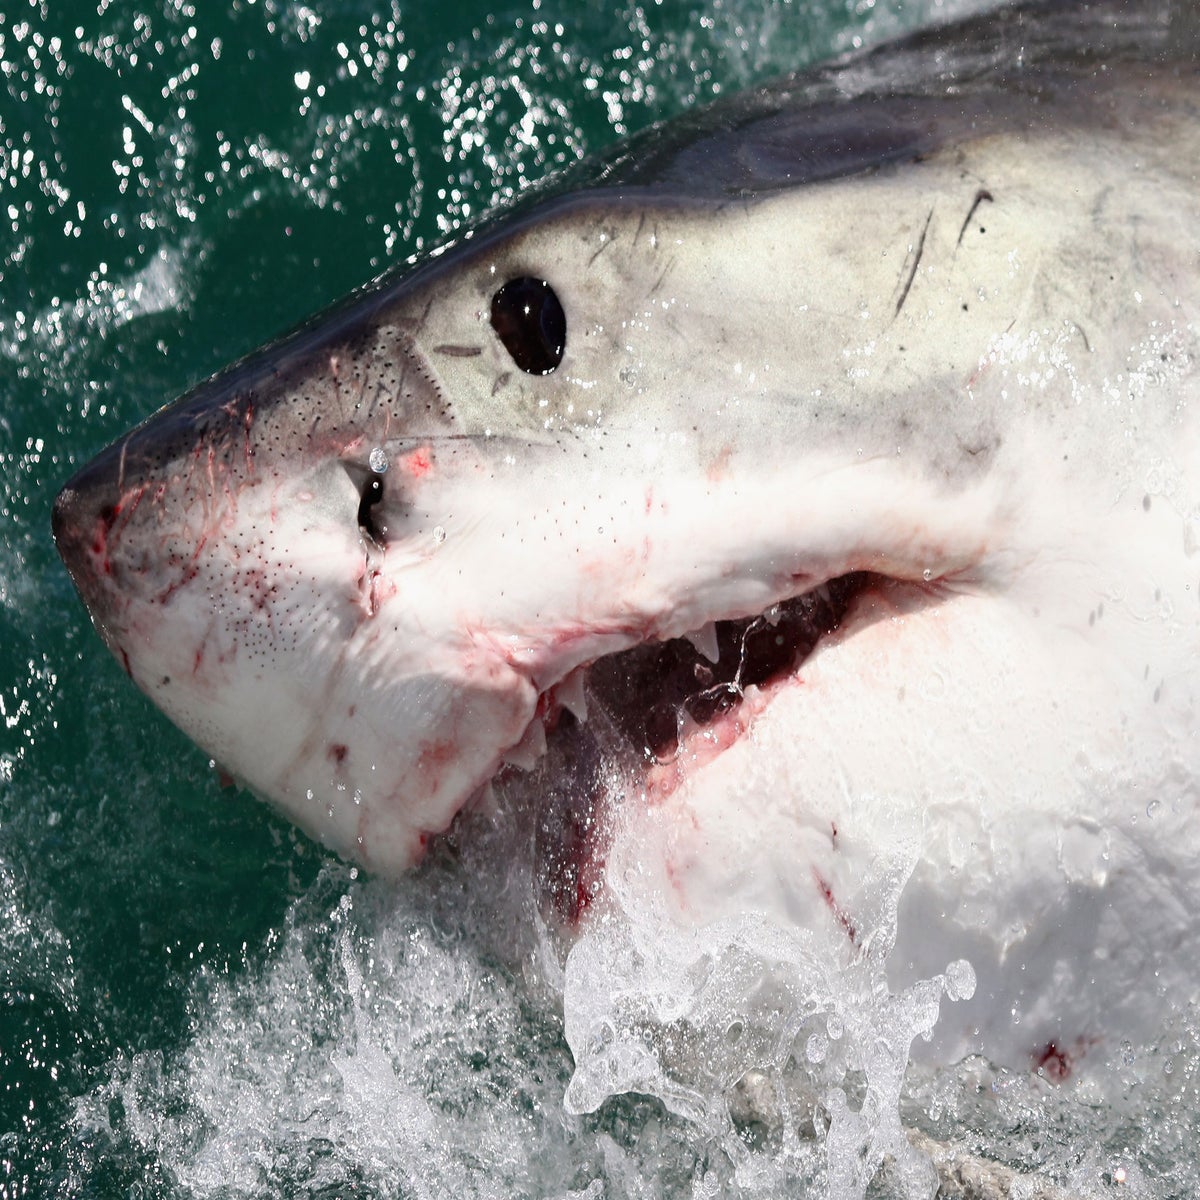 British surfer punches shark on the nose to escape attack